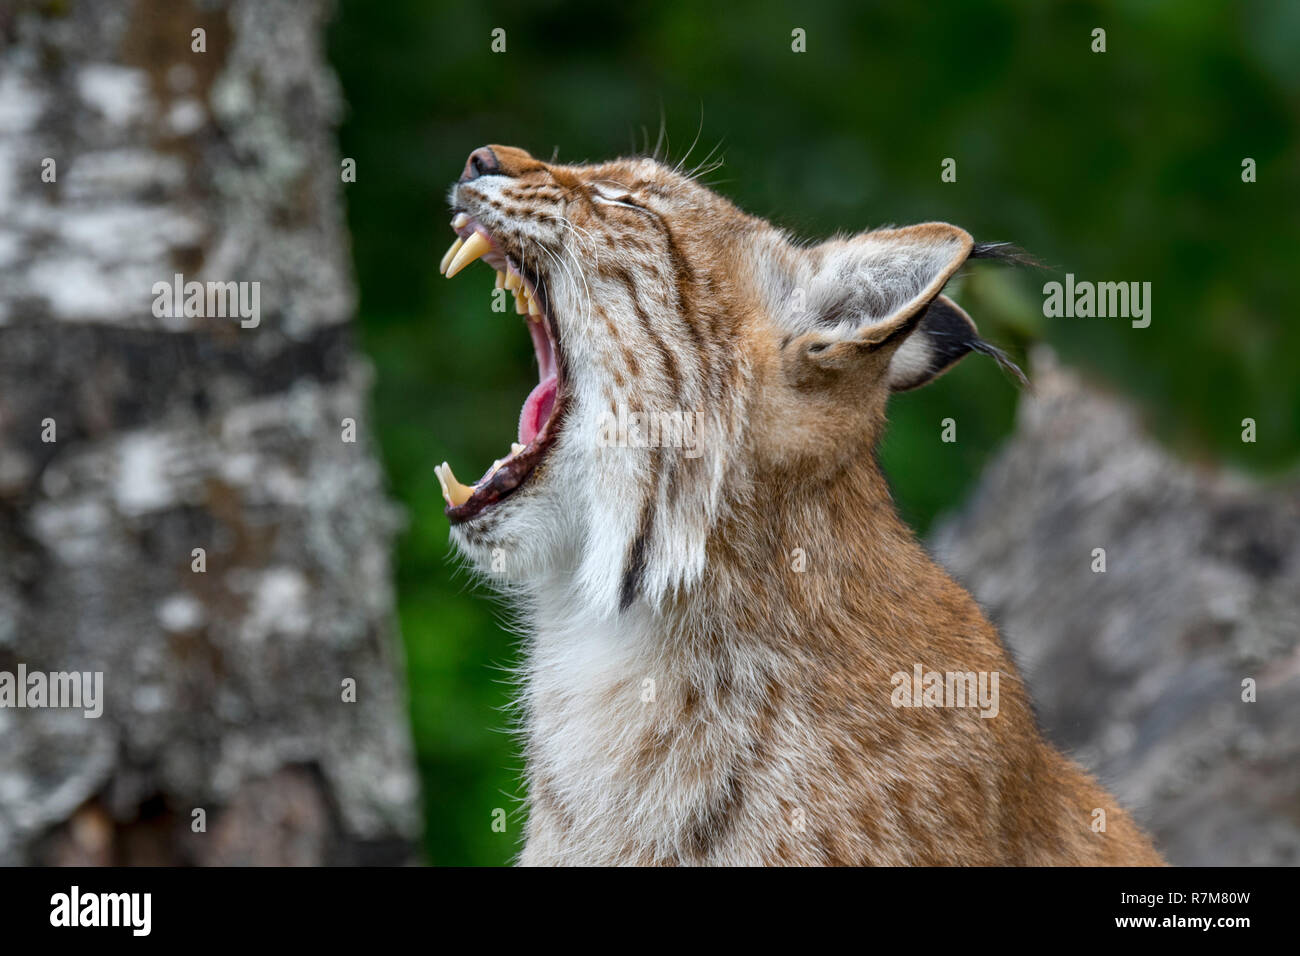 Close up portrait of yawning Eurasian lynx (Lynx lynx) showing teeth and long canines in open mouth Stock Photo